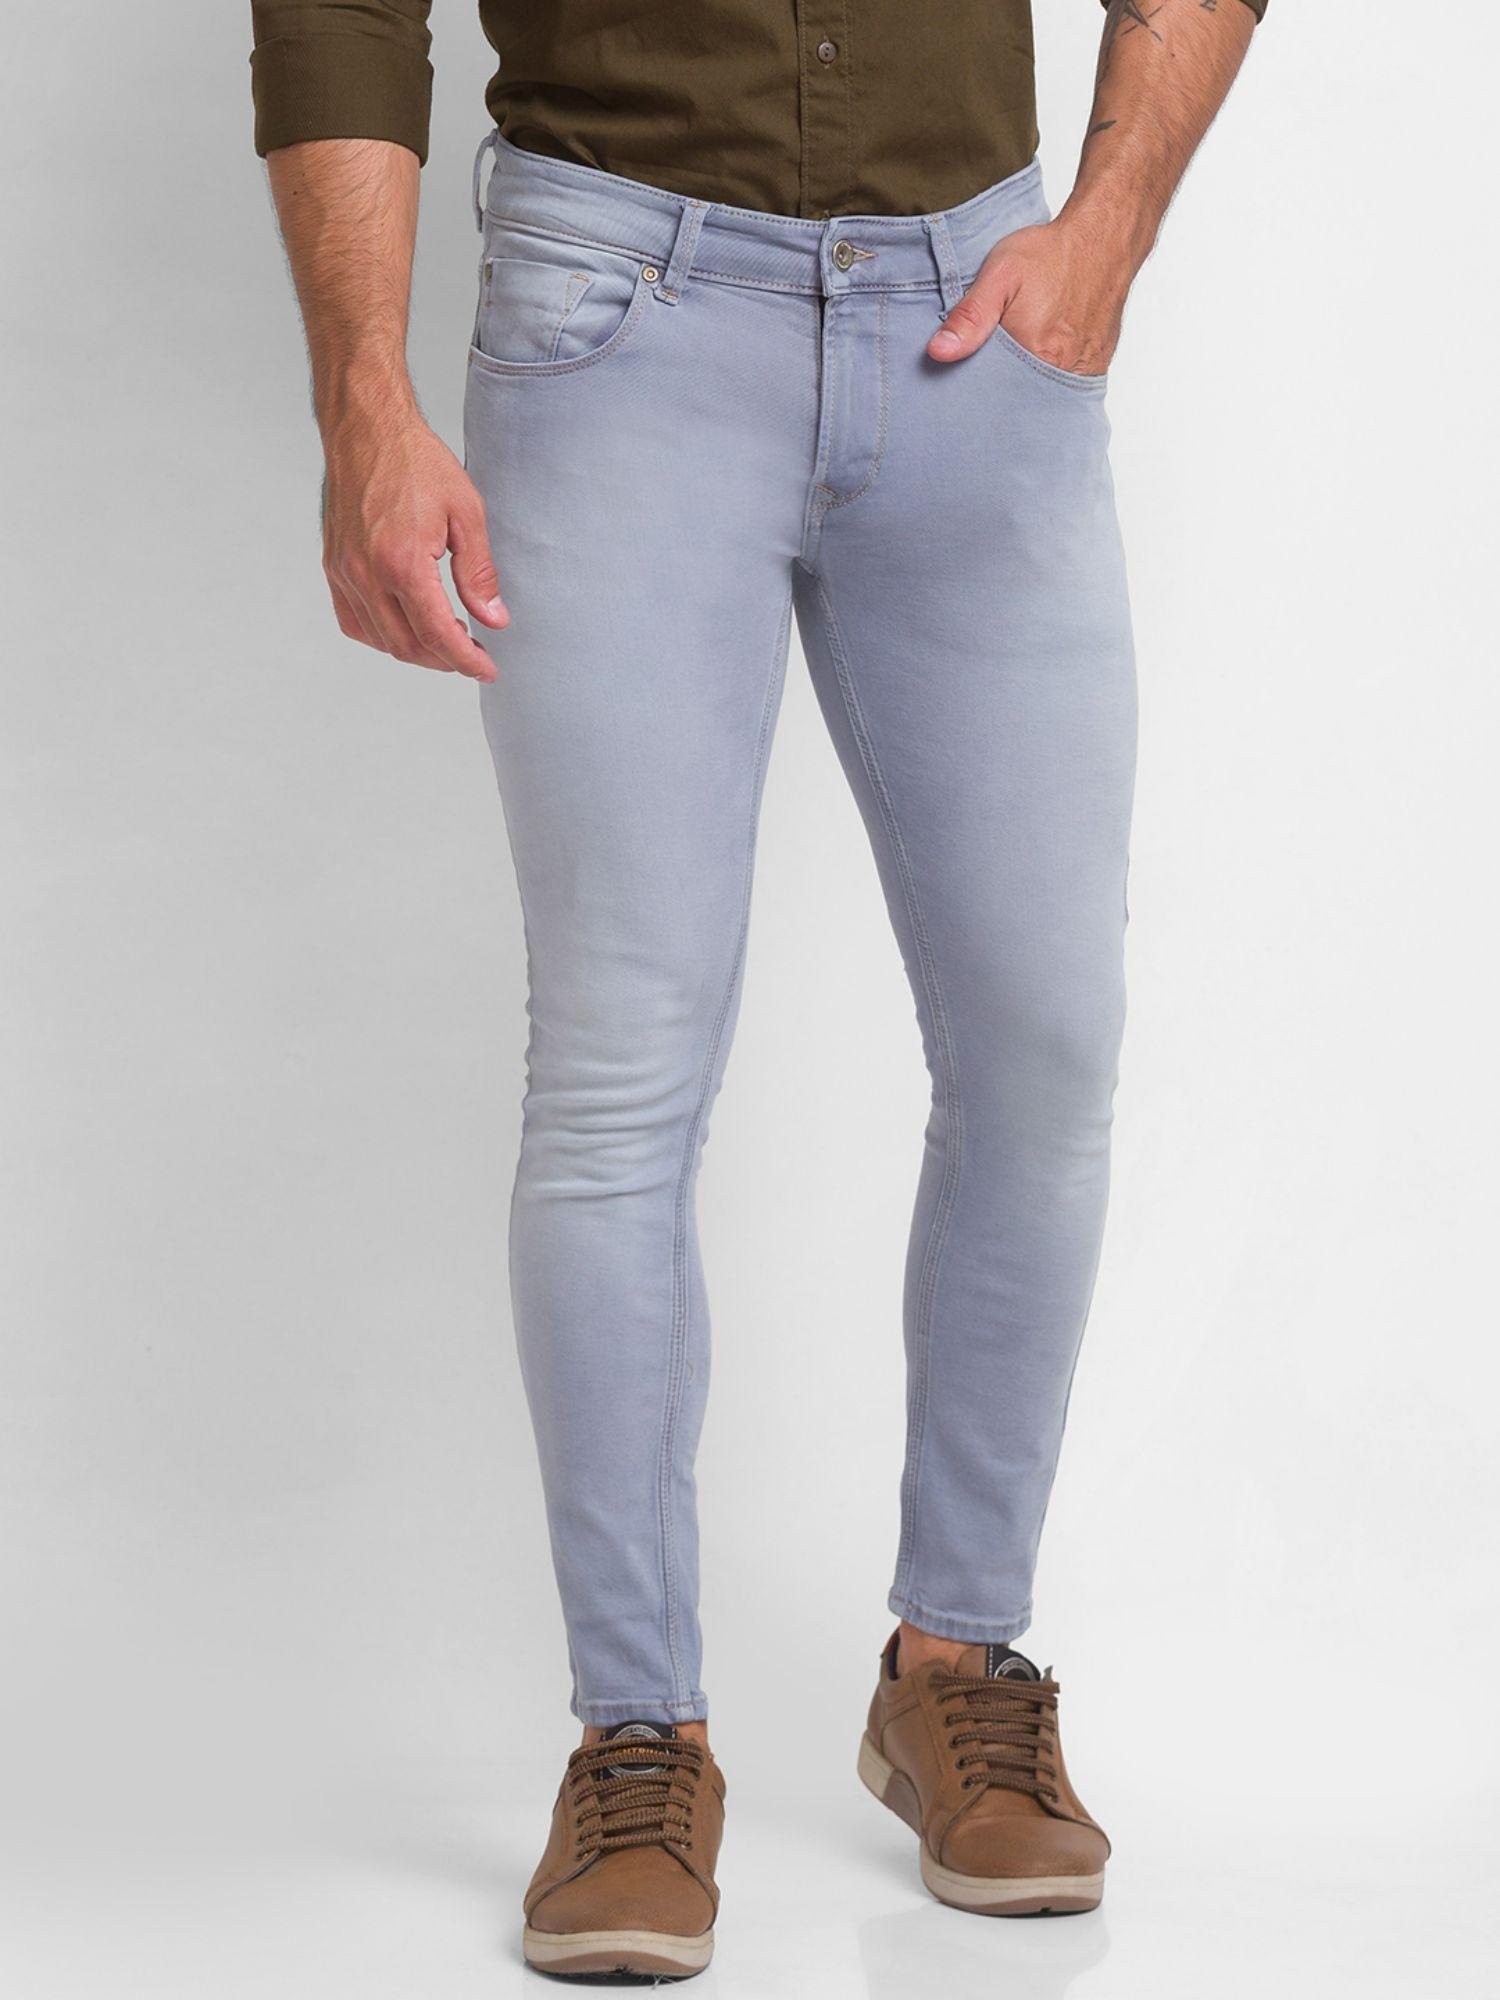 ice-grey-cotton-slim-fit-tapered-length-jeans-for-men-(kano)